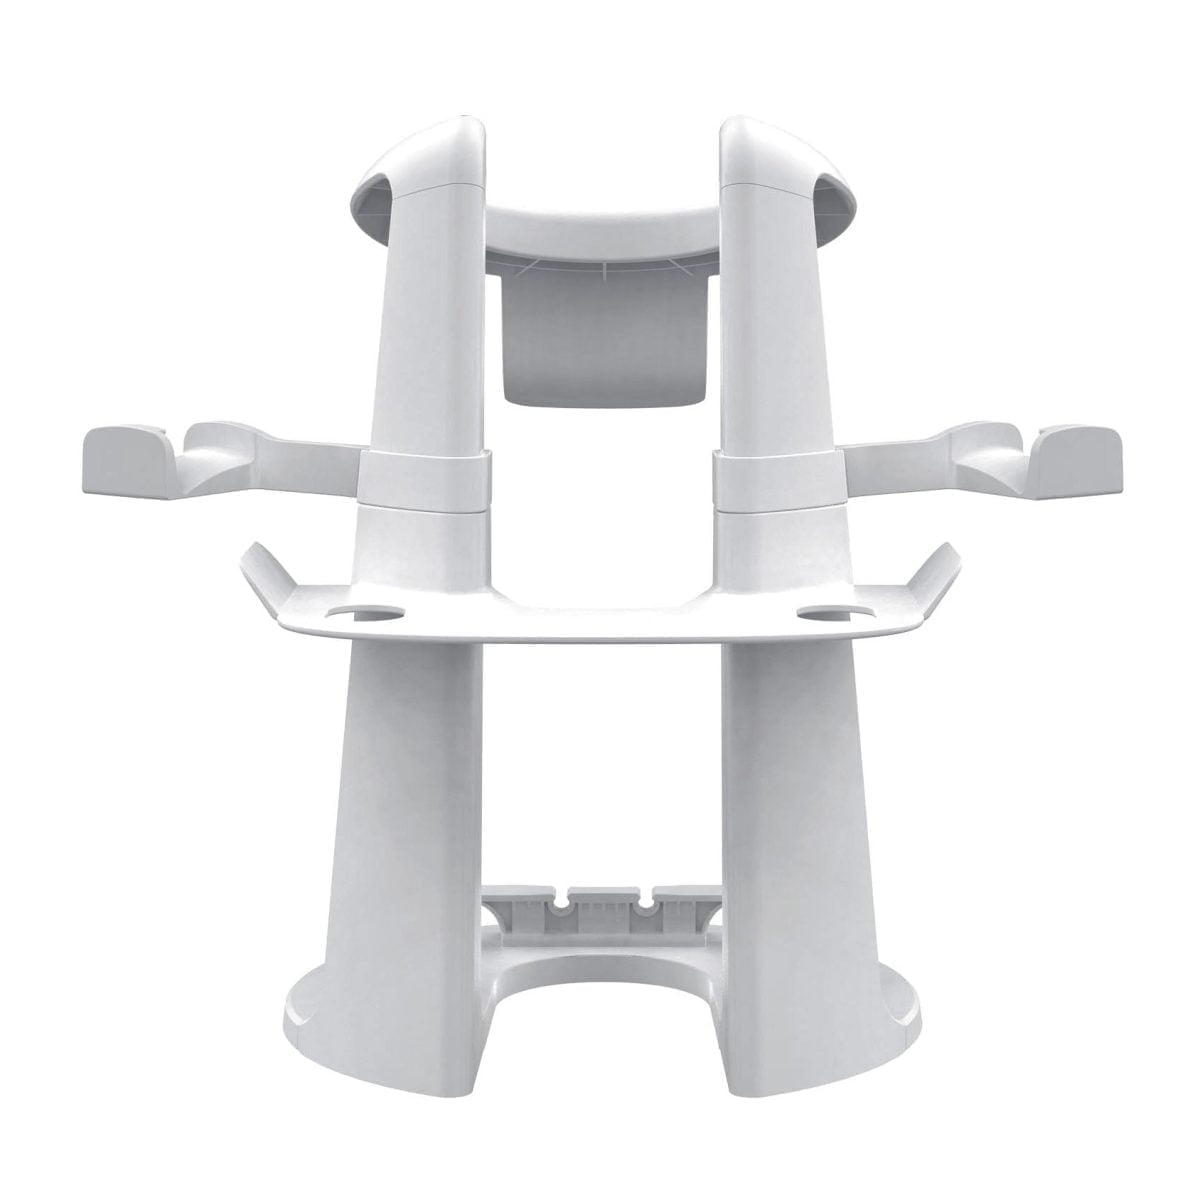 6473847Cv13D &Lt;H1&Gt;Stand For Oculus - White&Lt;/H1&Gt; The Insignia Oculus Stand Is Specially Designed For Displaying And Storing Your Oculus Vr Headset And Touch Controllers. Built With A No-Slip Base, This Stand Is A Safe And Stable To Place To Store And Organize Your Vr Headset, Controllers And Cables. Compatible With Most Vr Systems Including The Oculus Series (Oculus Rift/Rift S/Quest/Quest 2) Vr Headset And Controllers Oculus Stand Insignia Stand For Oculus - White